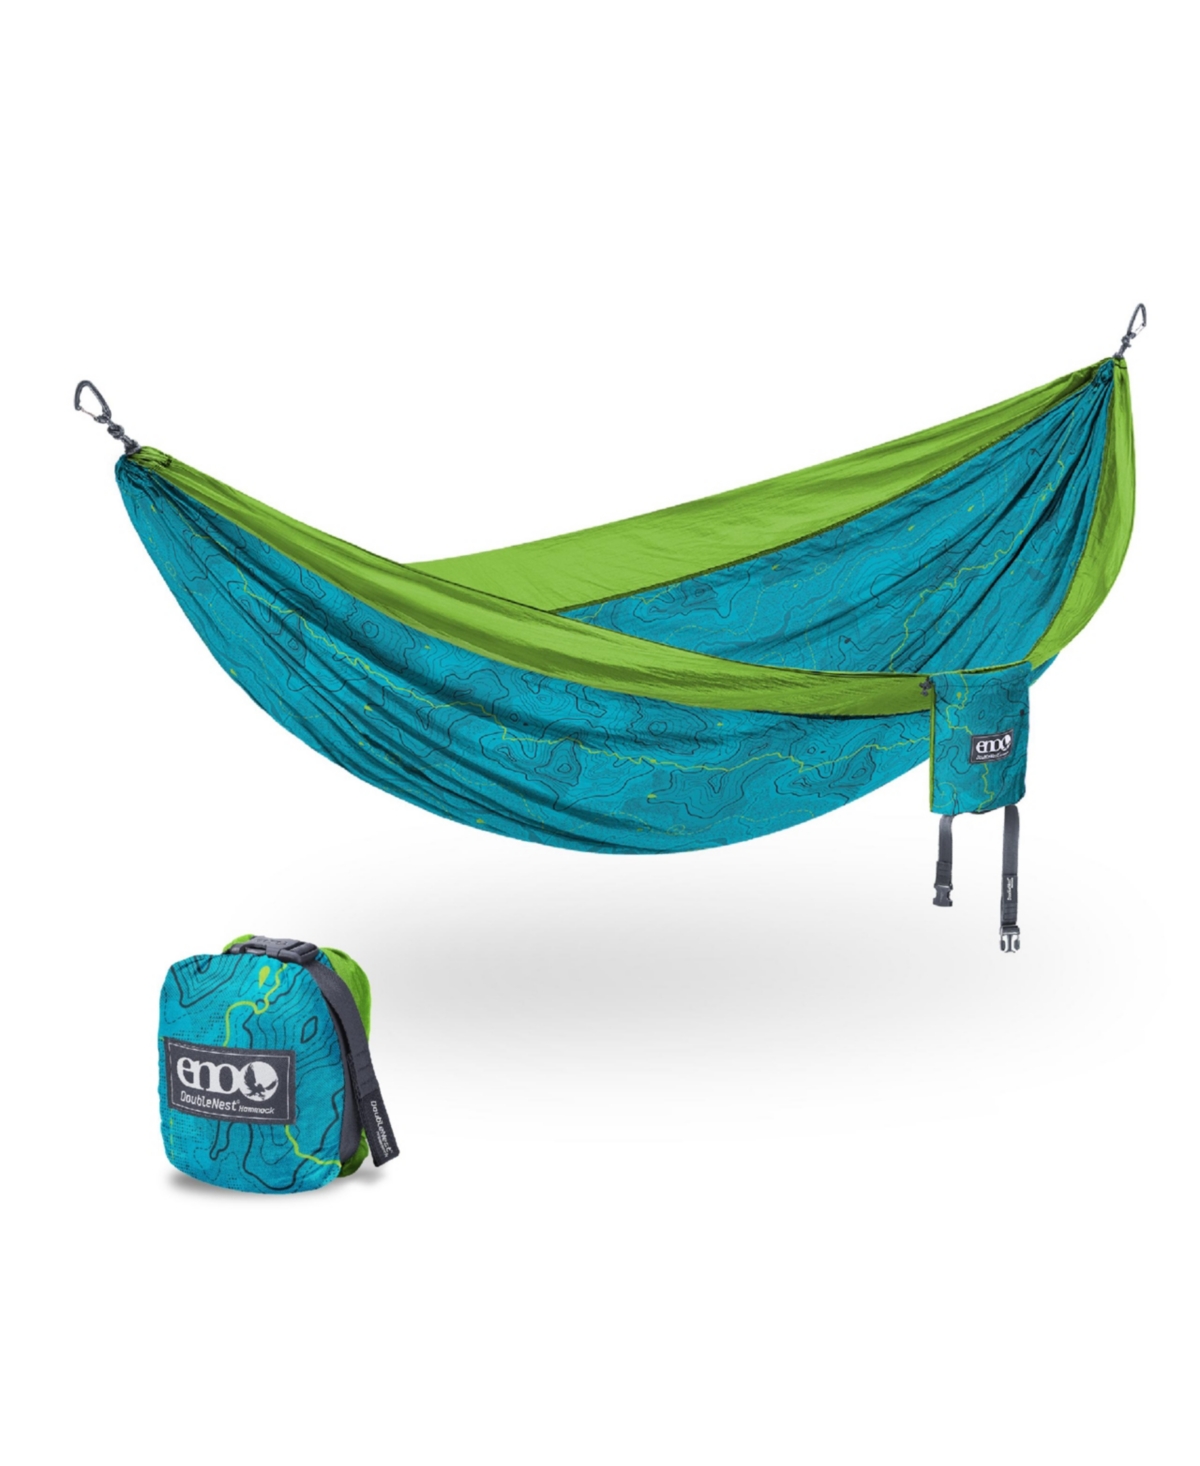 DoubleNest Hammock - Lightweight, Portable, 1 to 2 Person Hammock - For Camping, Hiking, Backpacking, Travel, a Festival, or the Beach - Continent